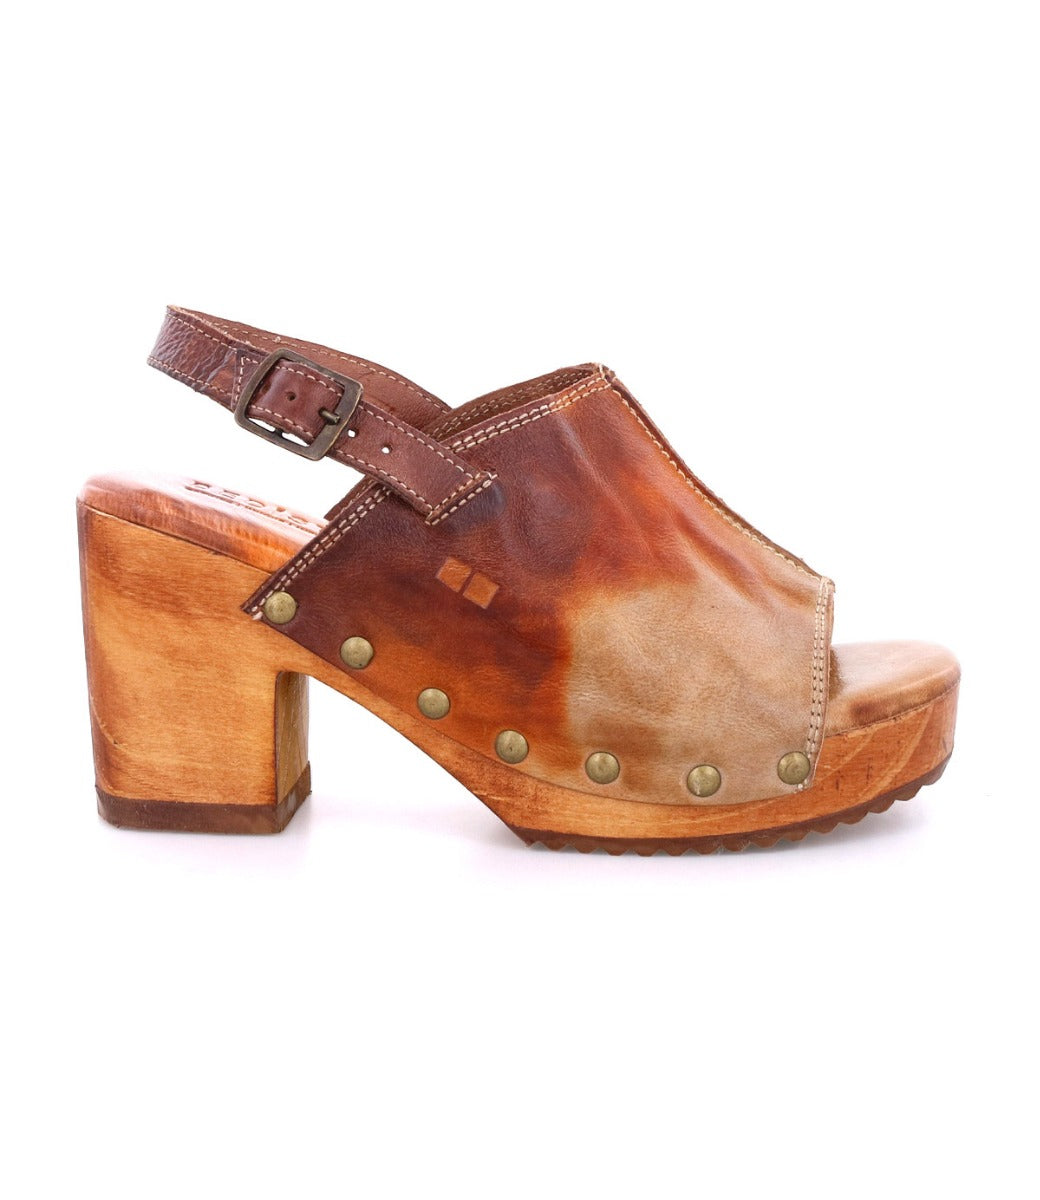 A Marie women's sandal with a wooden heel from Bed Stu.